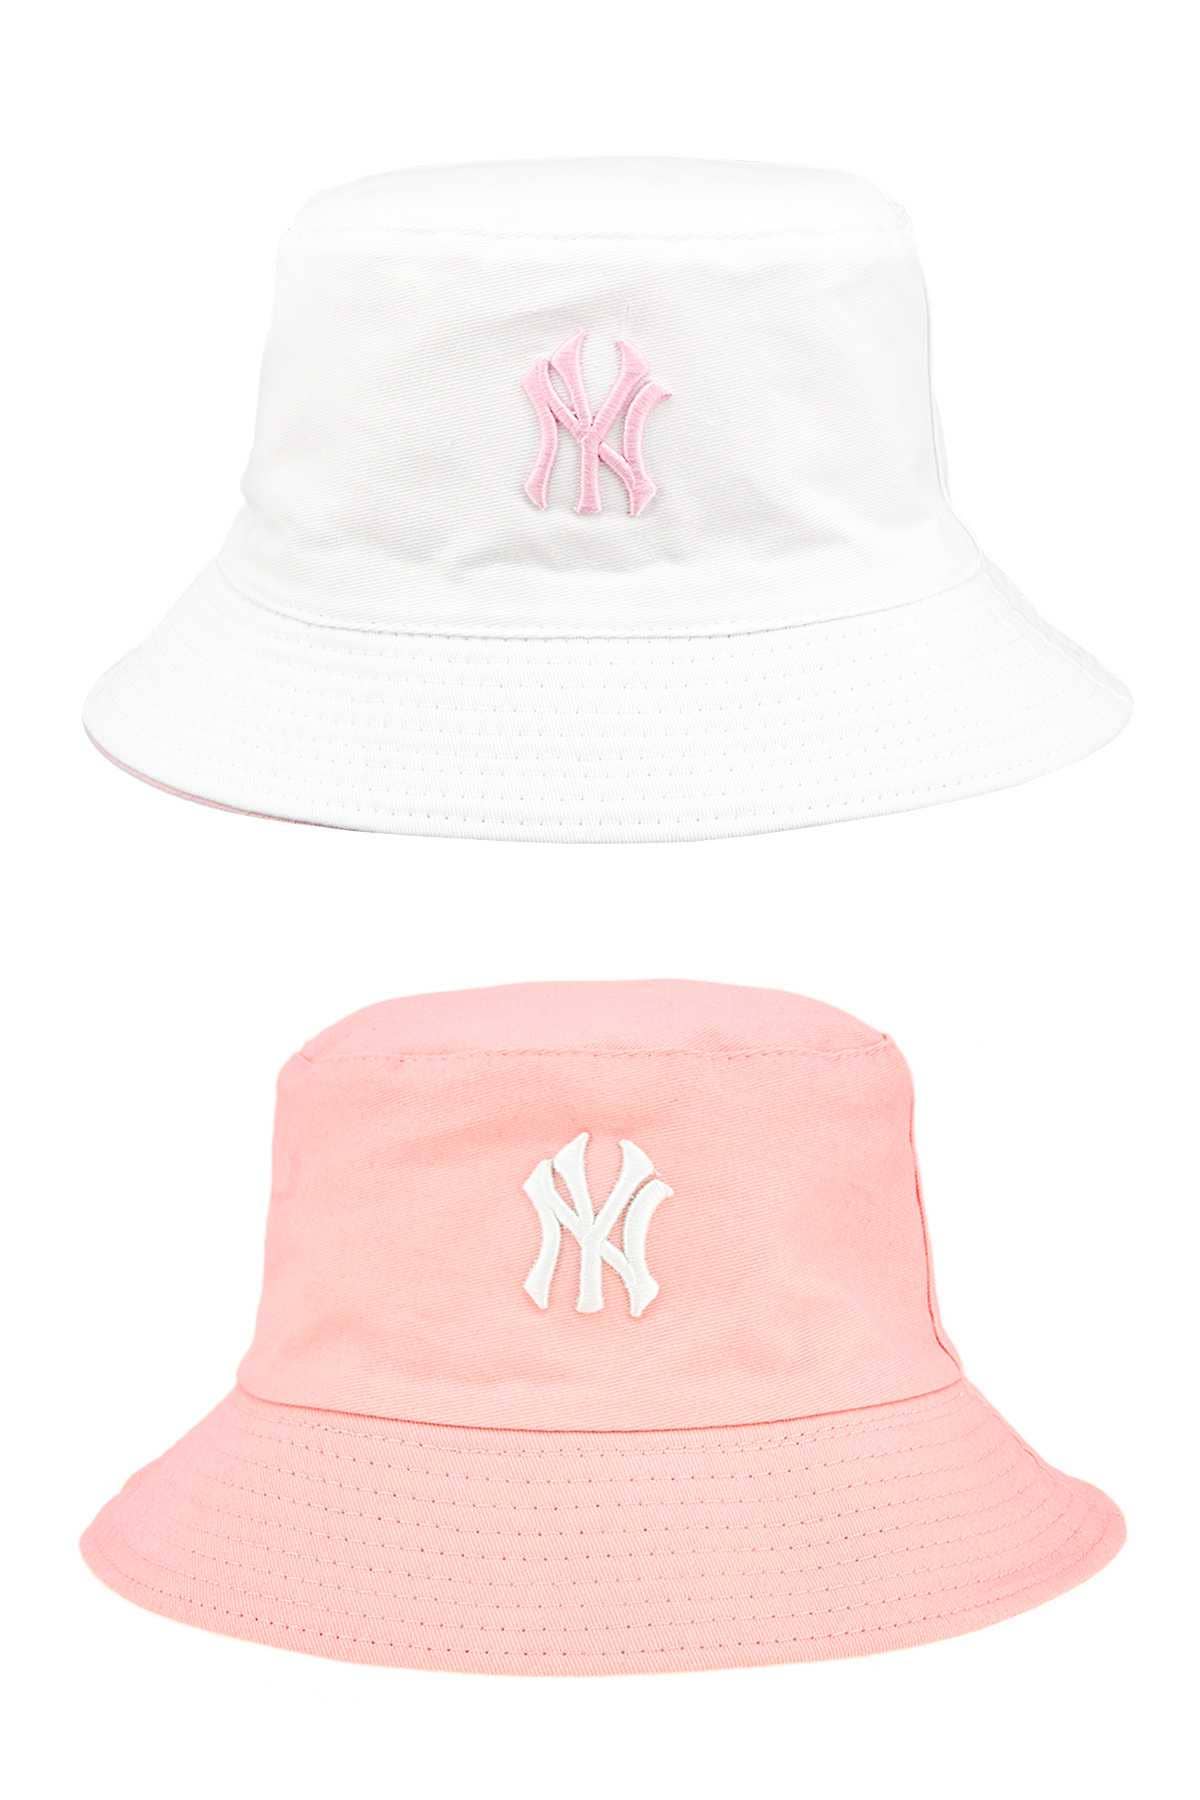 NY 3D Embroidery Reversible Bucket Hat